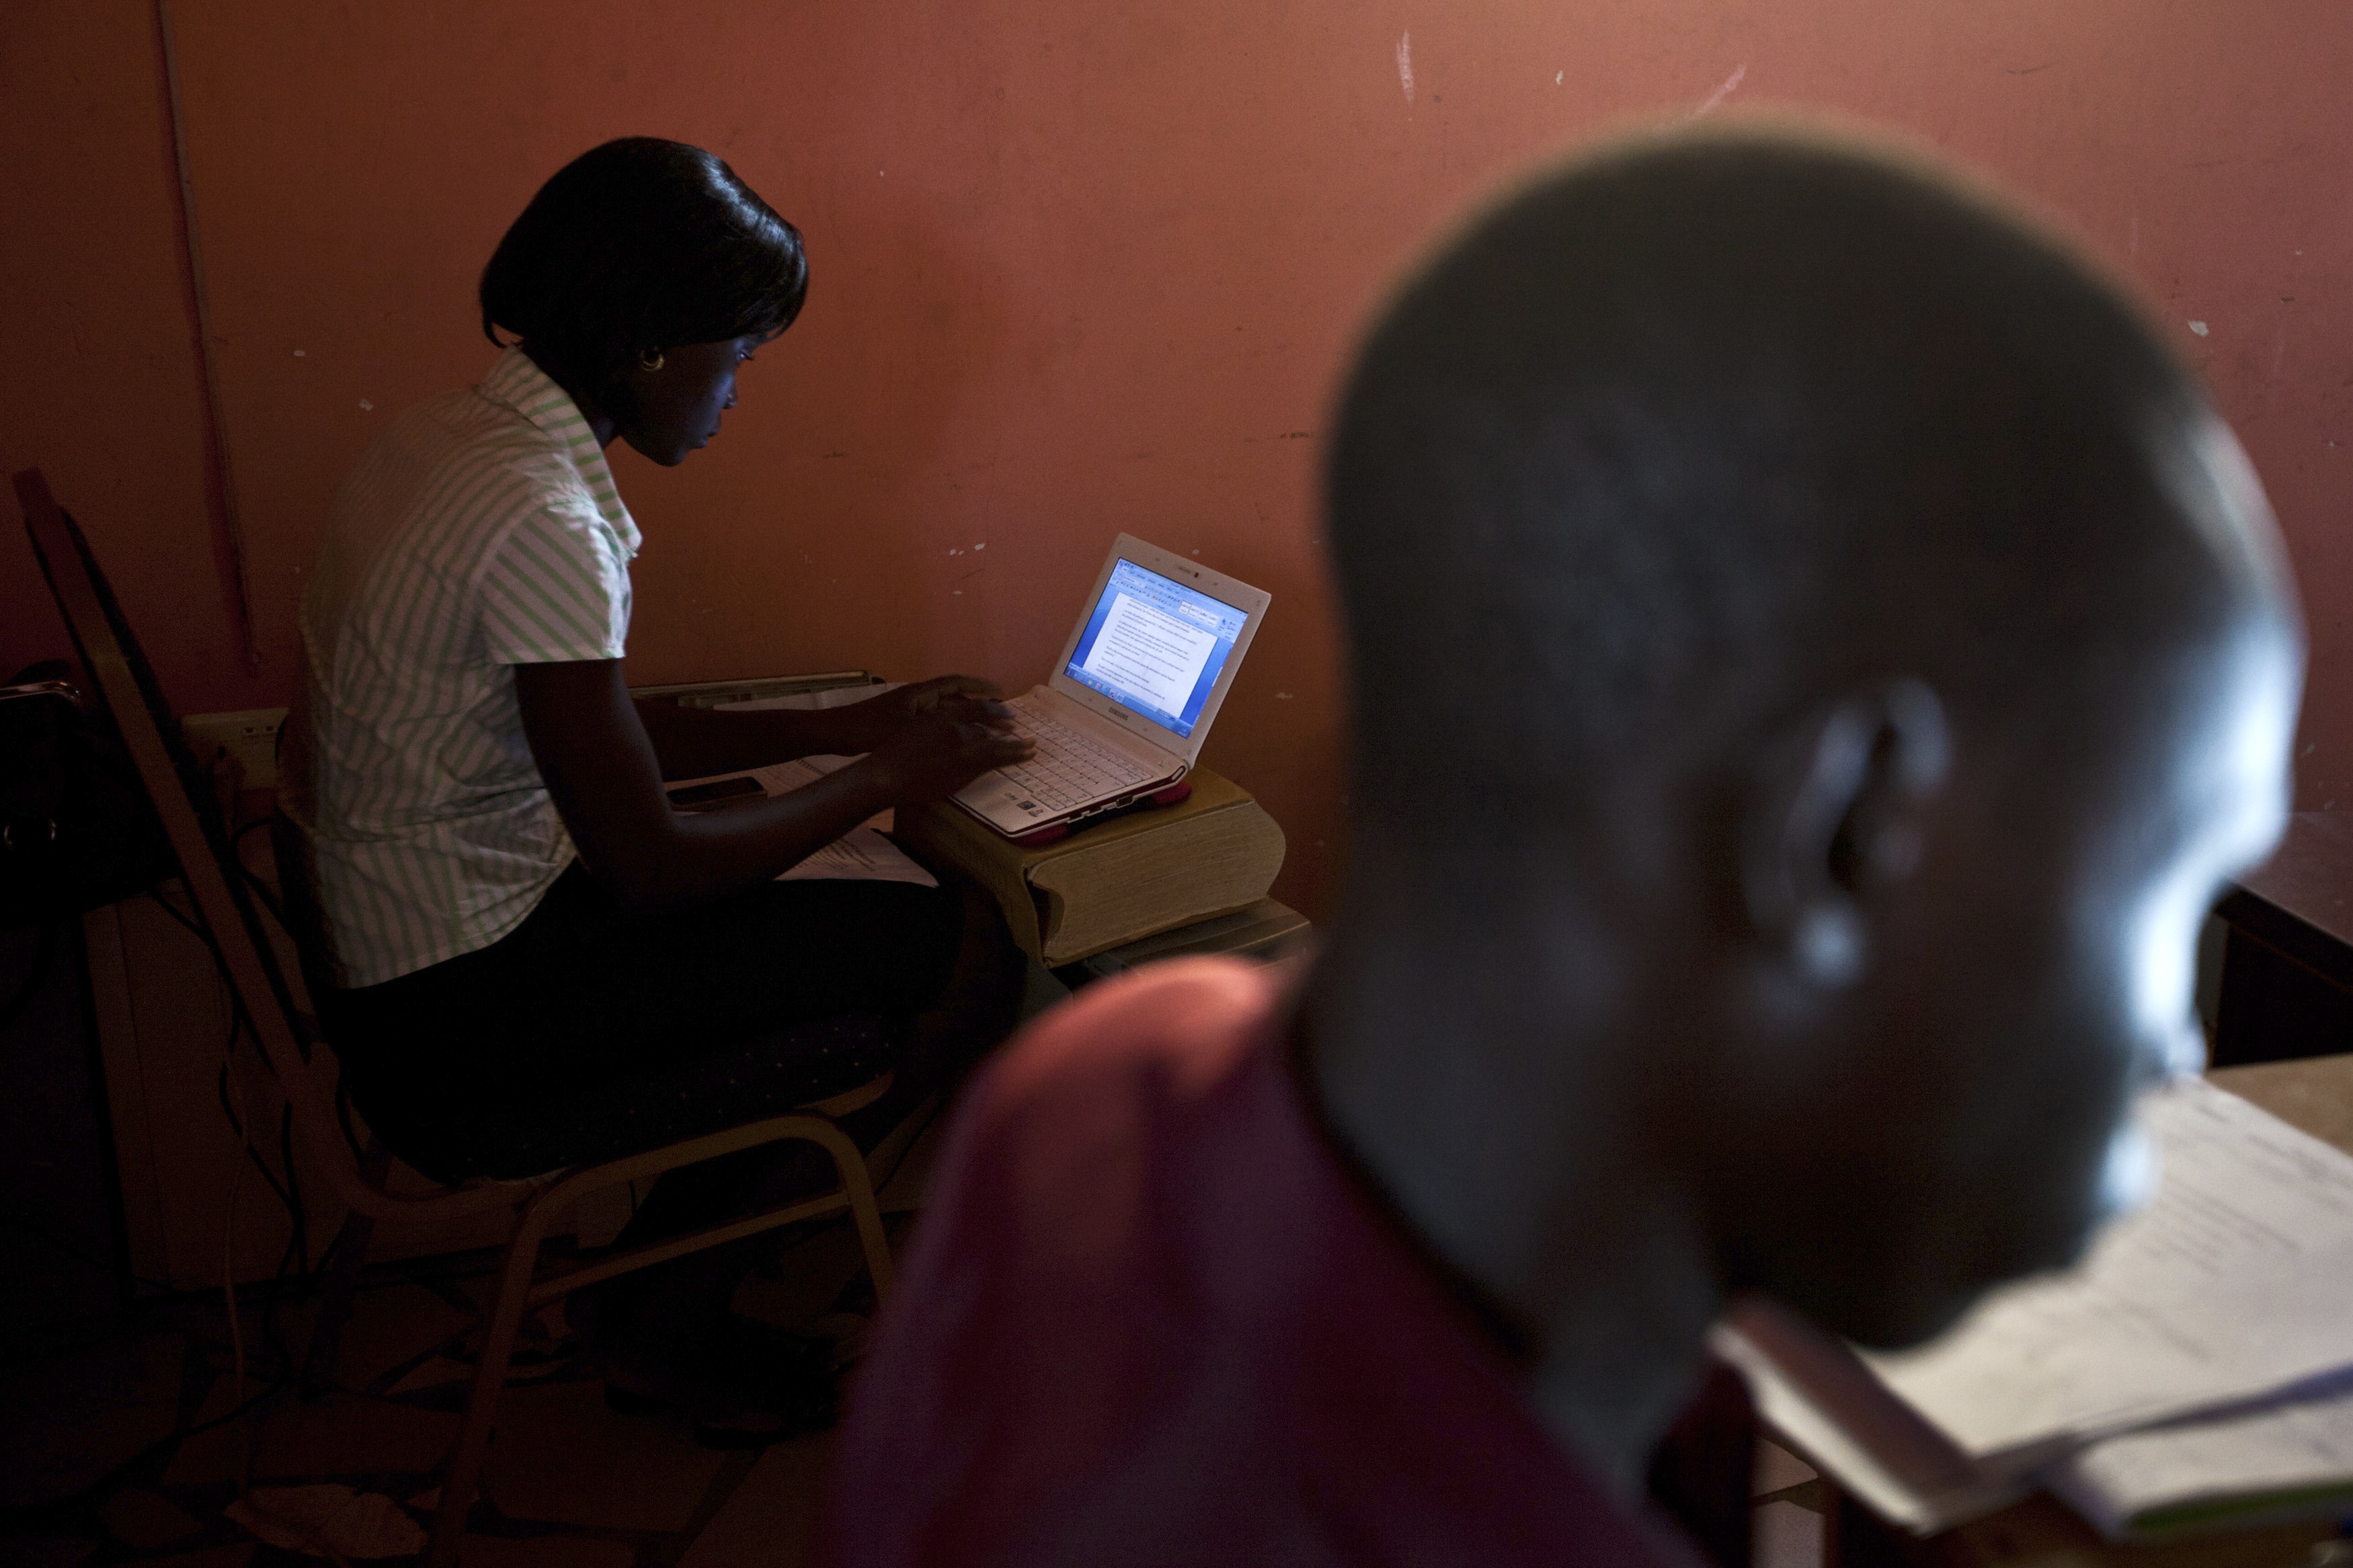 Two reporters at "The Citizen" newspaper work at their desks in Juba, South Sudan, 18 June 2012, REUTERS/Adriane Ohanesian